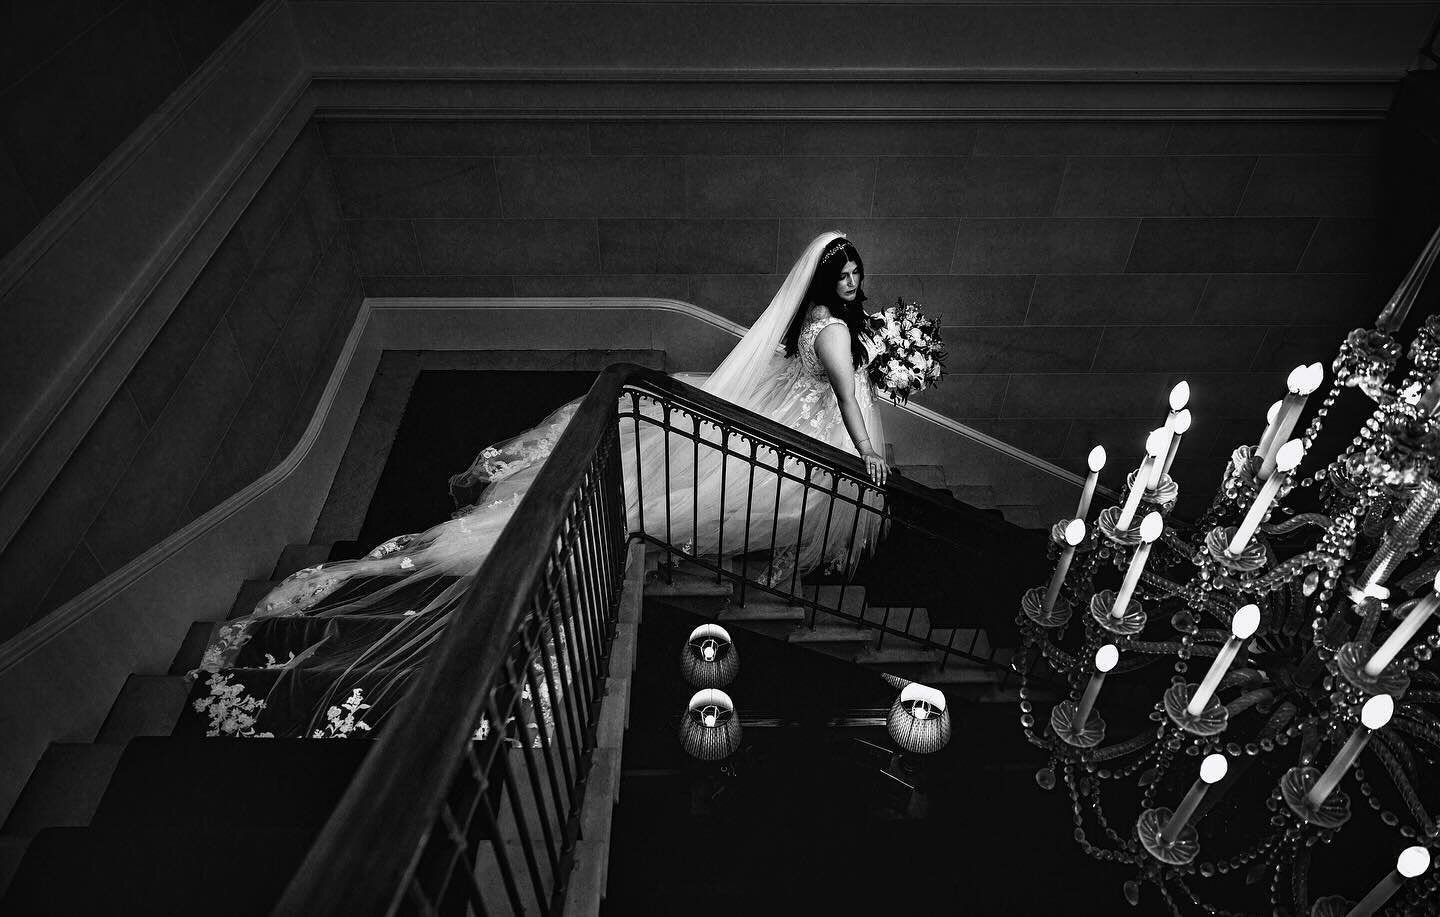 Capturing the timeless elegance as she descends towards forever. 💍✨

Welcome to 2024! Hope everyone had a Happy New Year! Let&rsquo;s kick 2024&rsquo;s ass and create breathtaking images!

#DFWWeddings #DallasBrides #FortWorthWeddings #TexasBride #D